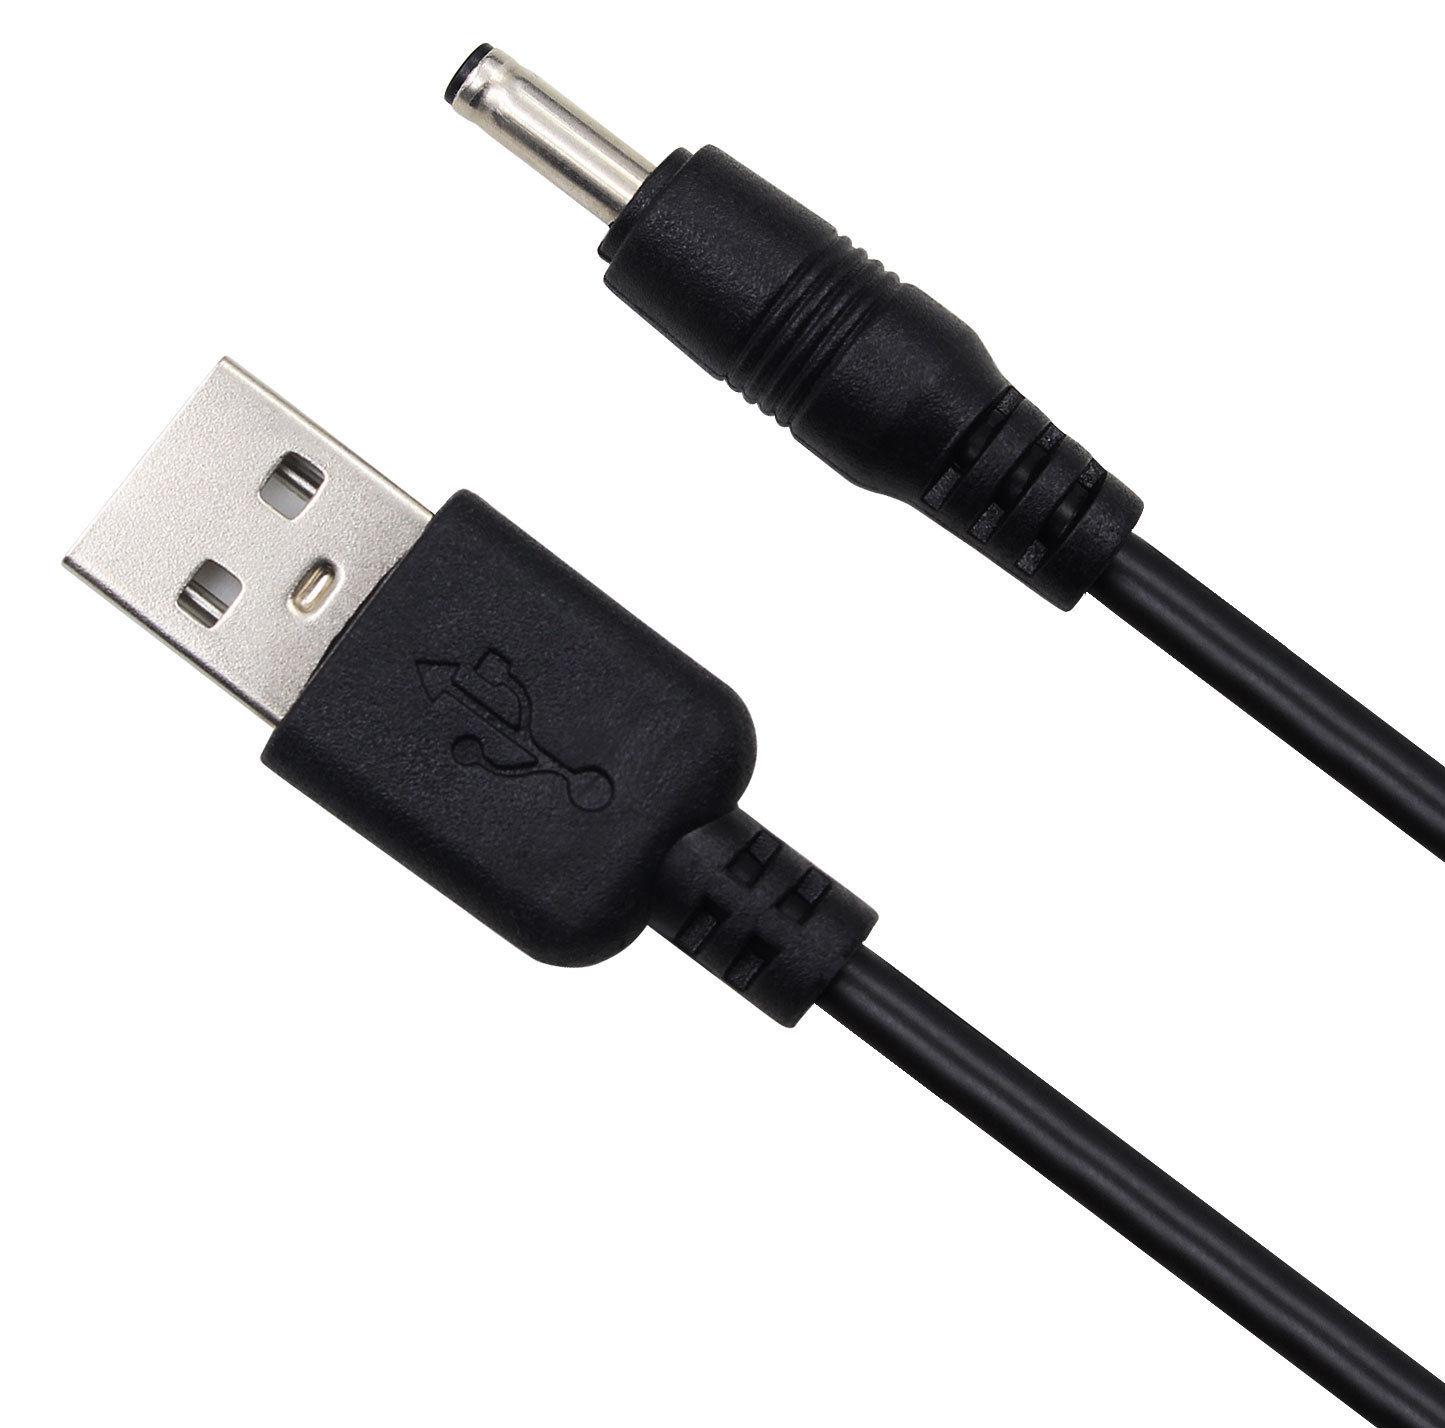 USB DC Charger Power Adapter Cable Cord Lead For Remington MB900 Trimmer 